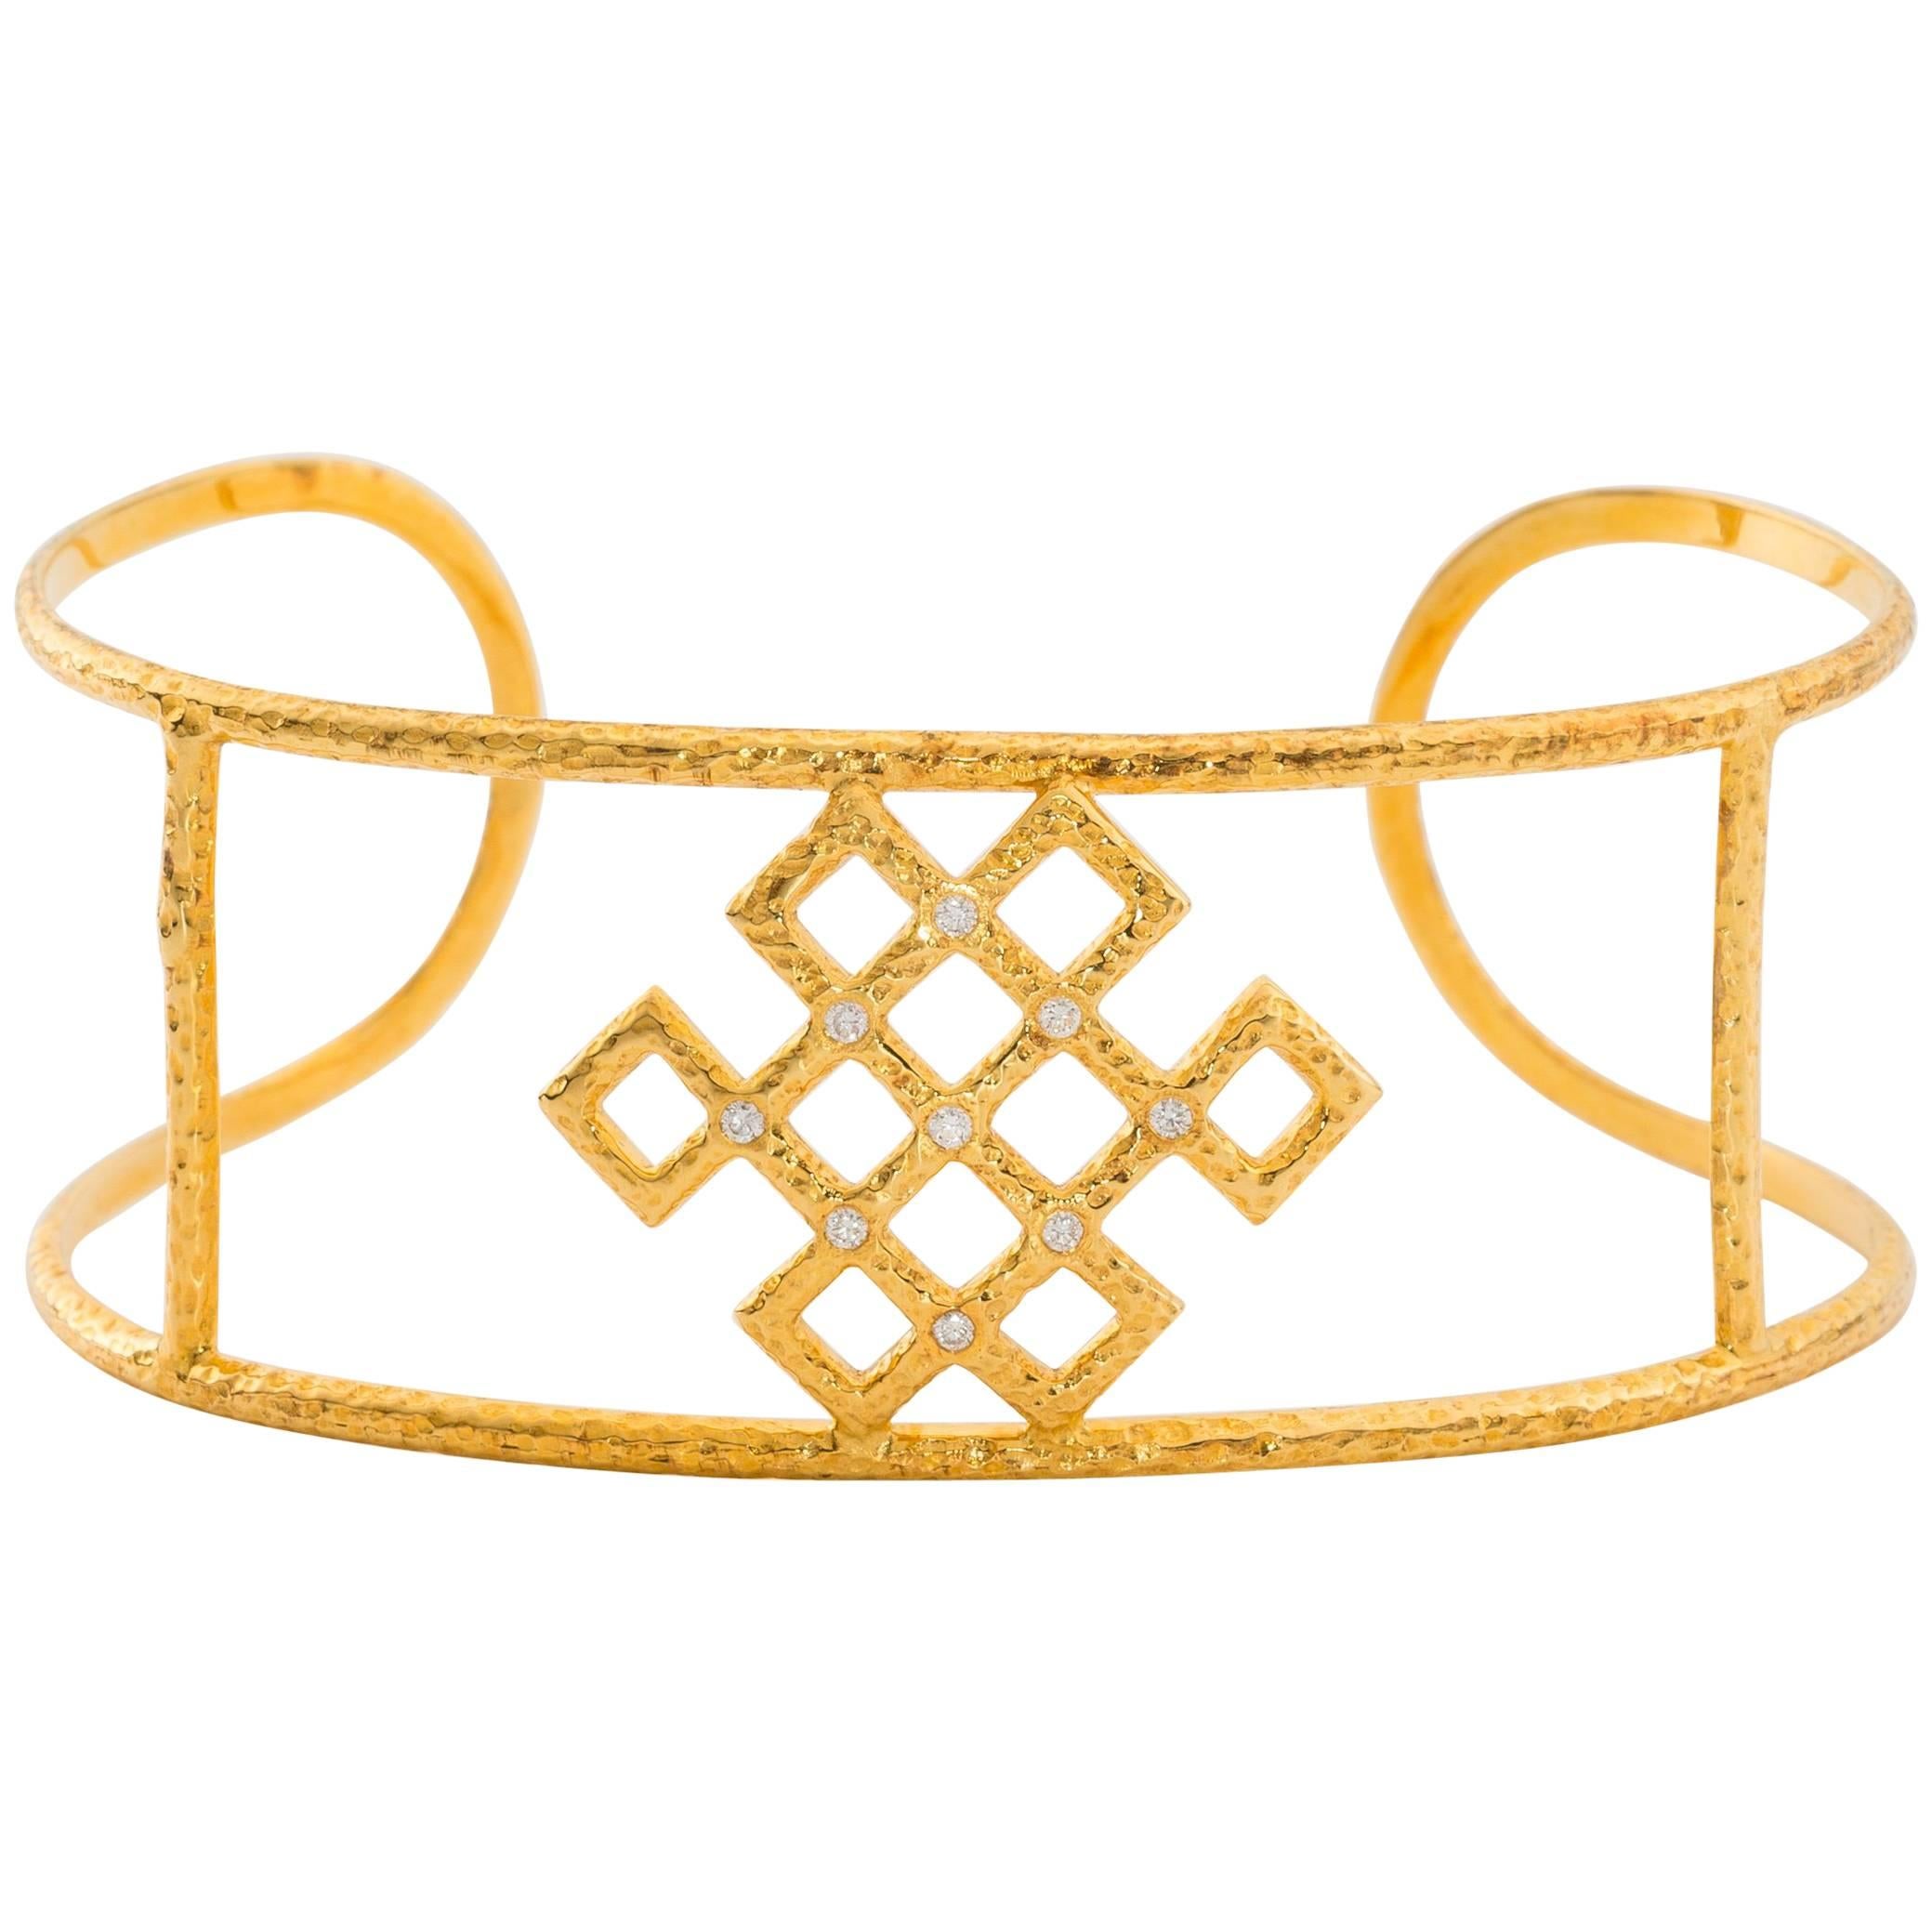 Chinoiserie Endless Knot Cuff, Hand-Hammered Solid 18 Karat Gold and Diamonds For Sale